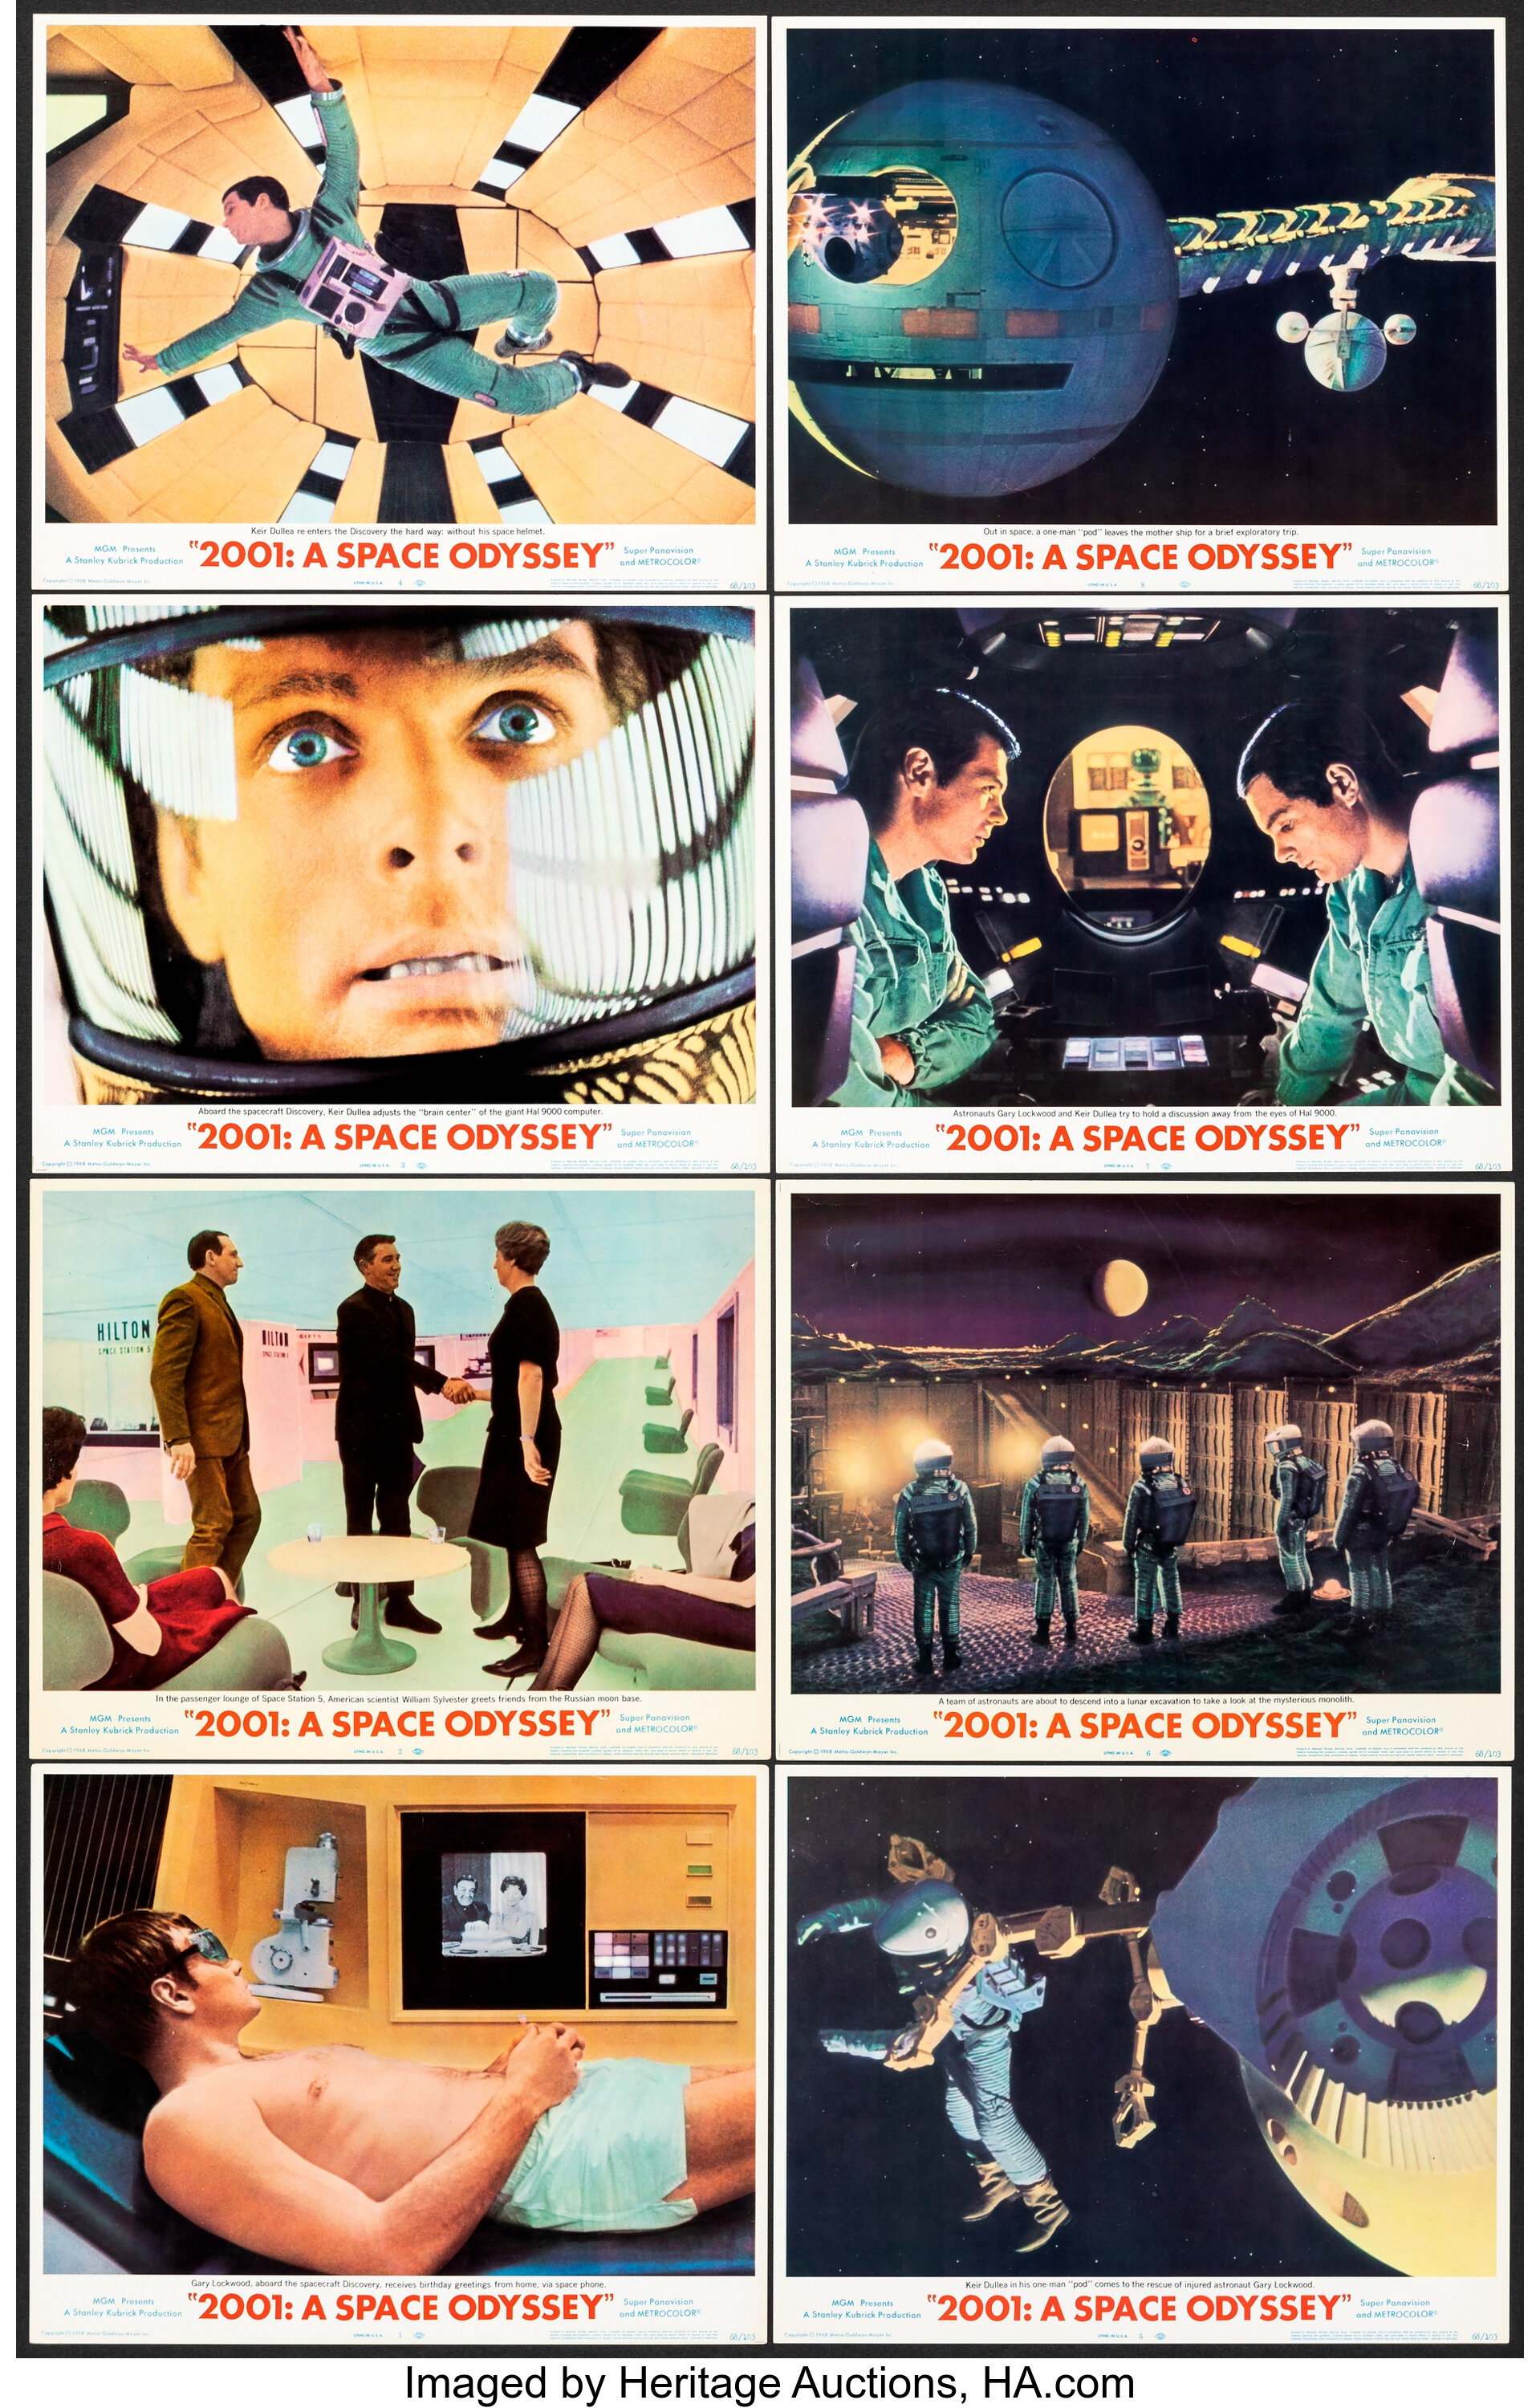 2001 A Space Odyssey Mgm 1968 Very Fine Lobby Card Set Of 8 Lot 51003 Heritage Auctions 5769